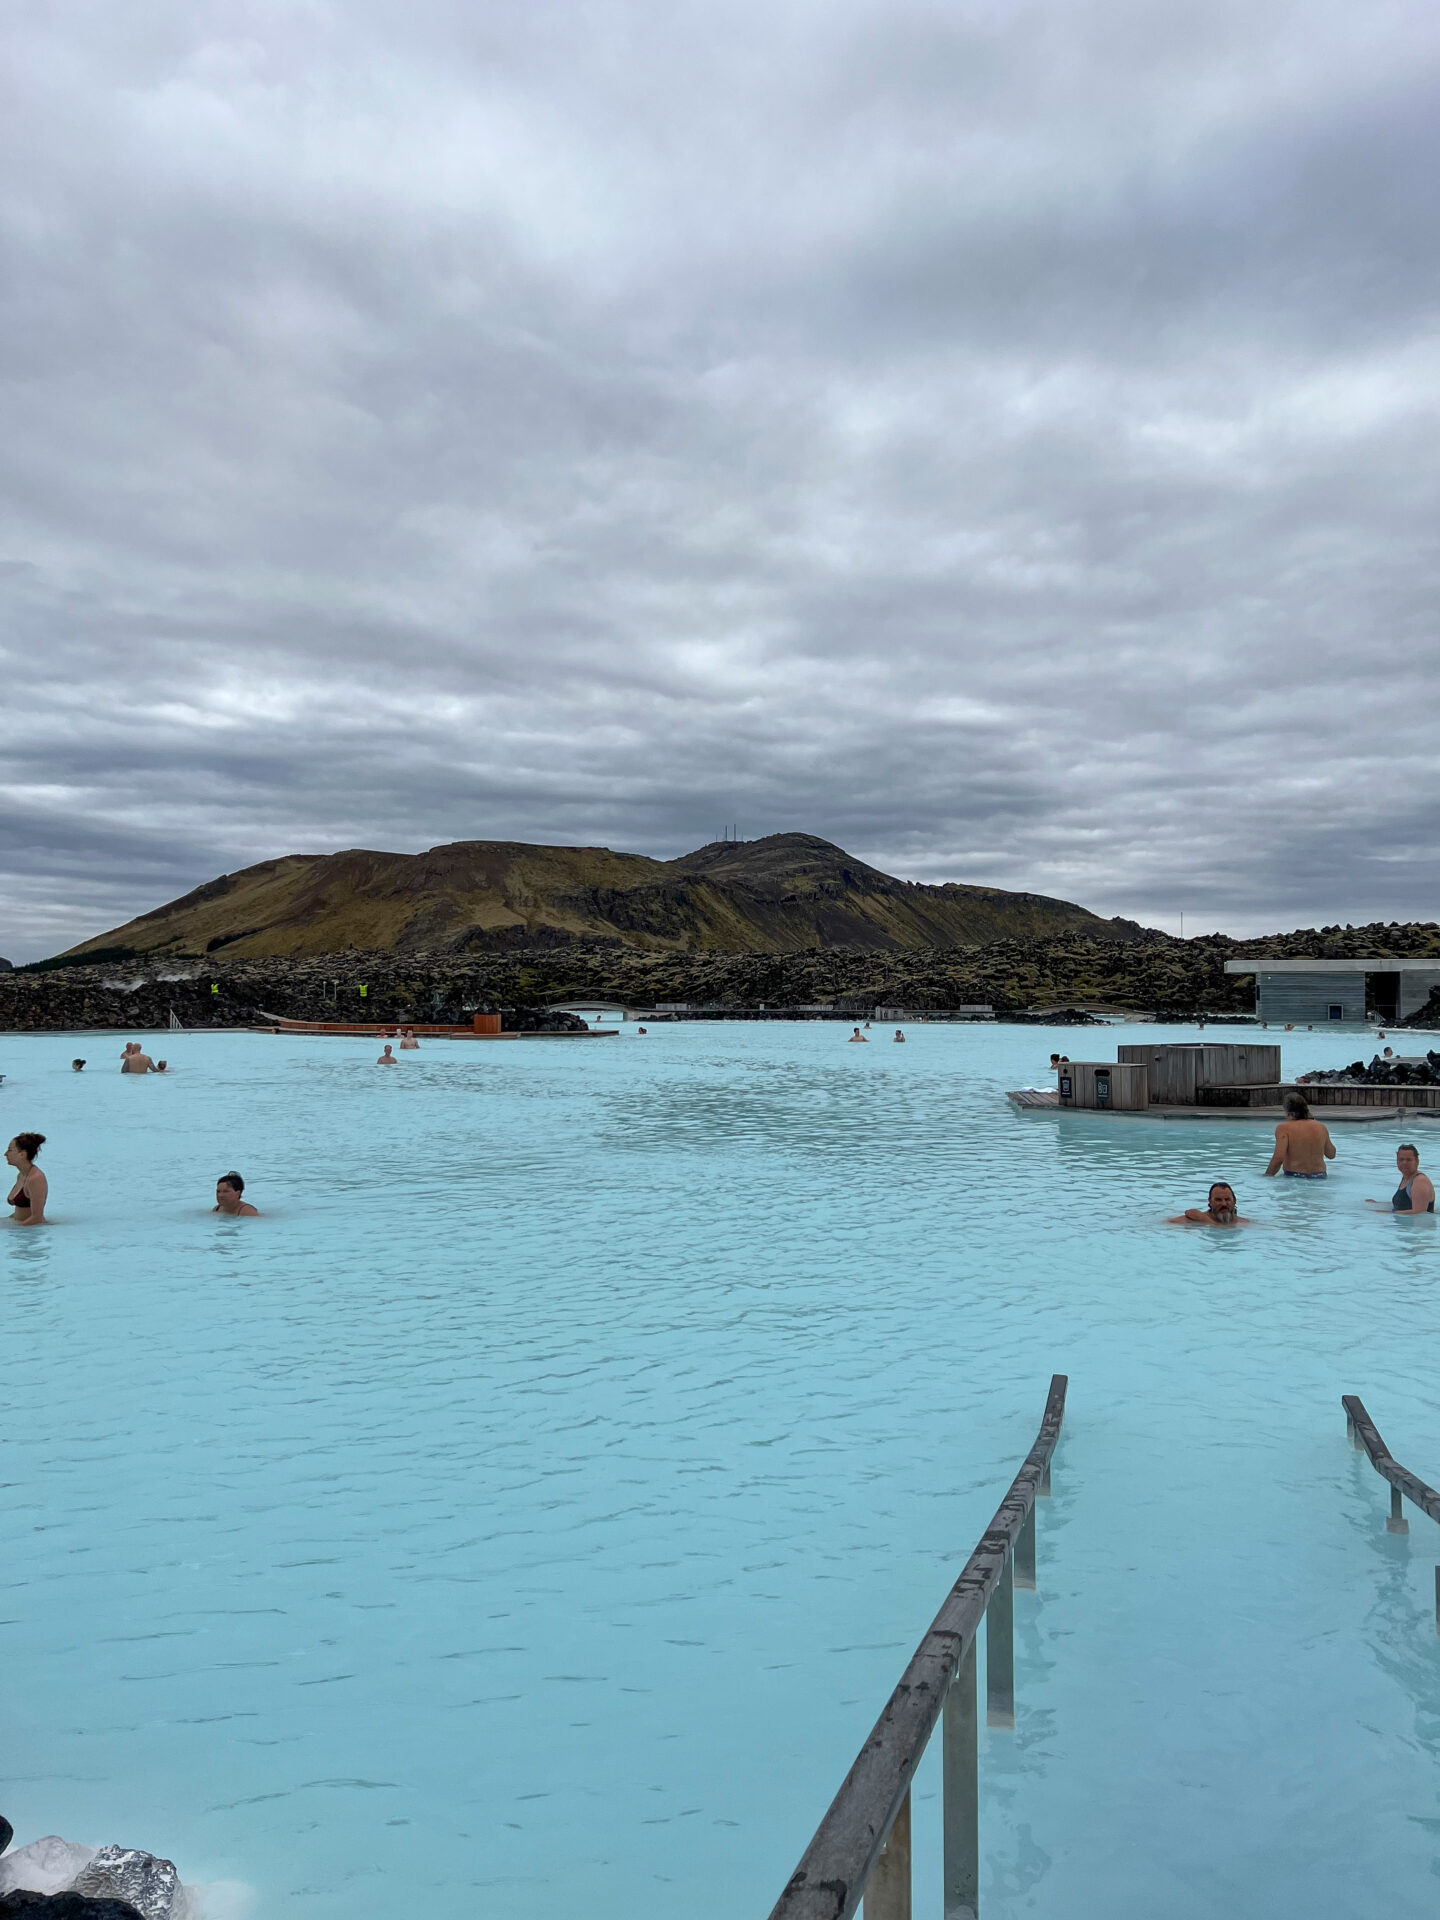 The Blue Lagoon in Iceland is a must on any Iceland itinerary